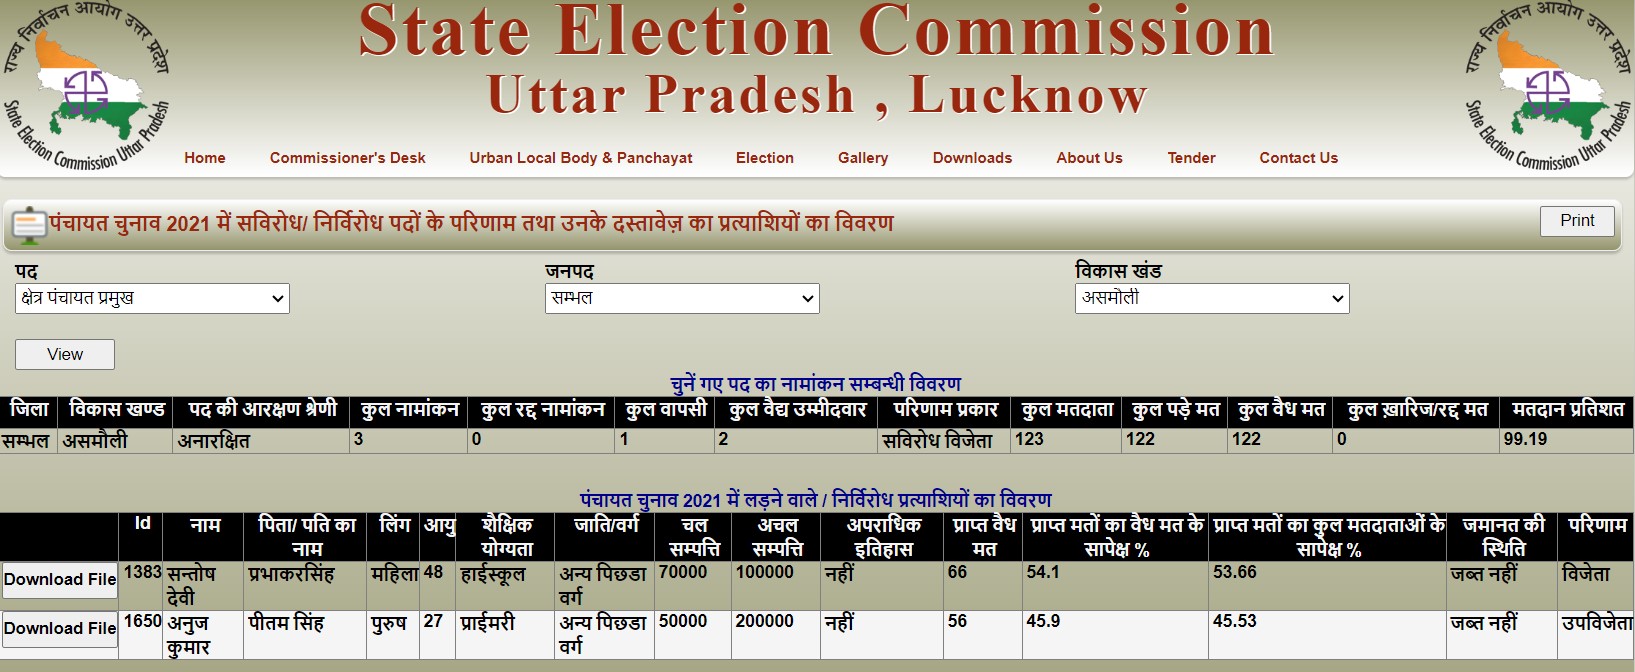 Details mentioned by Anuj Chaudhary during elections